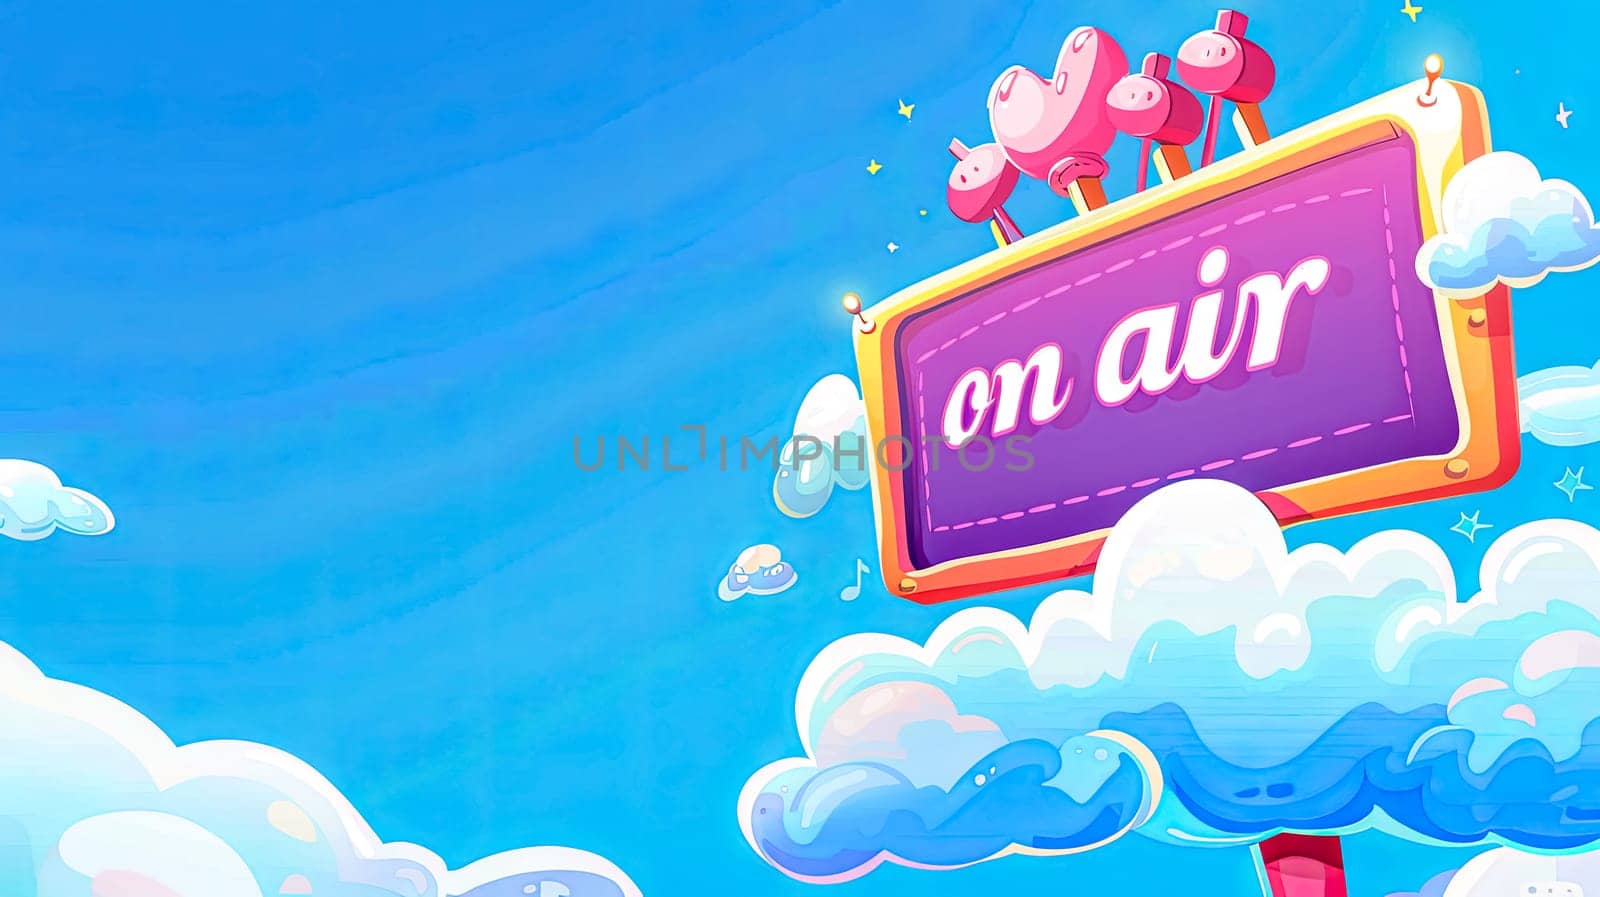 Vibrant illustration of a whimsical on air sign with microphones against a bright blue sky